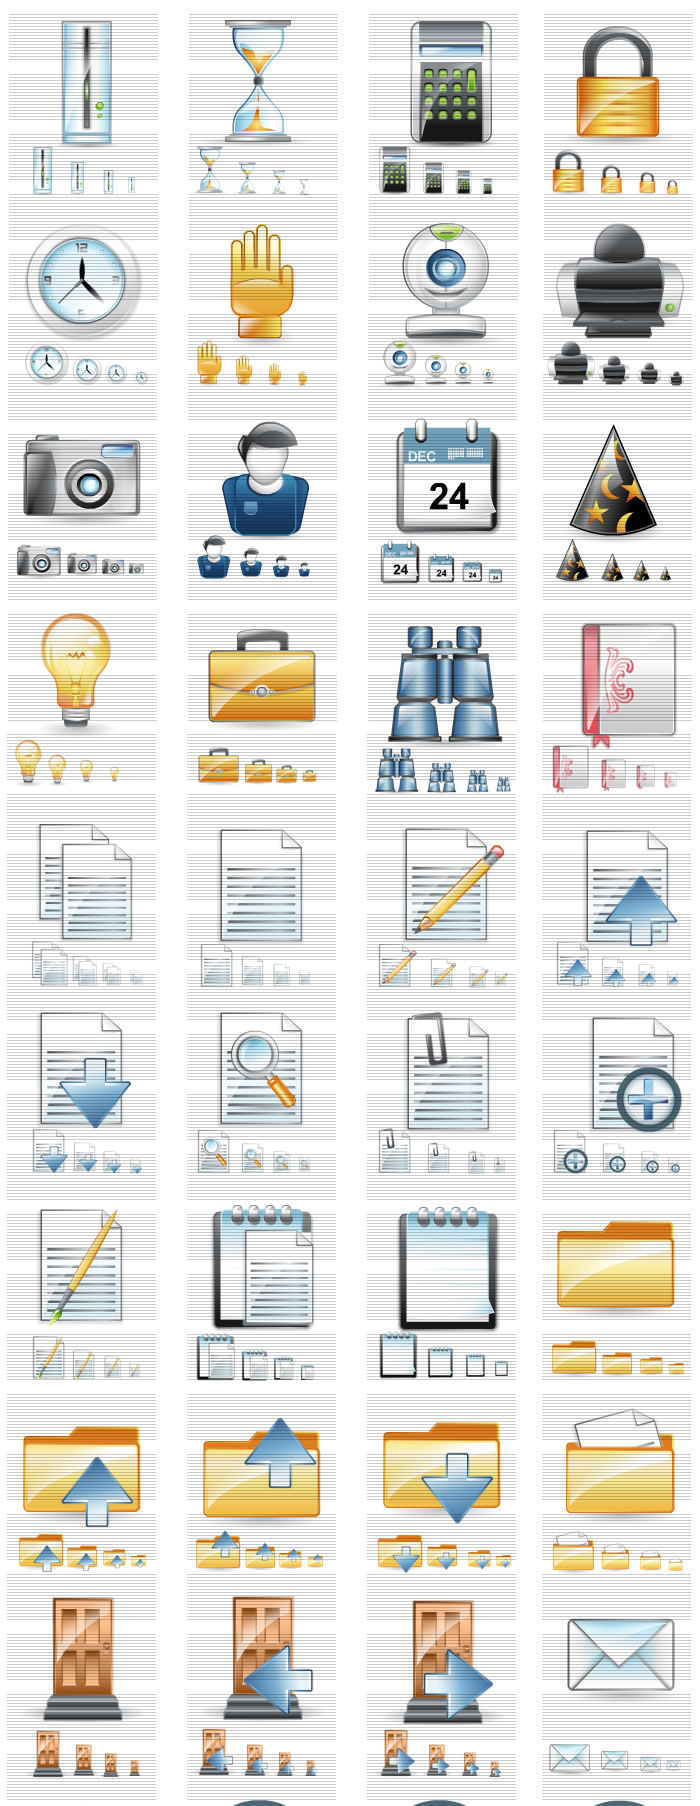 Sophistique - Stock Icons and web icons for your applications 1.0 software screenshot